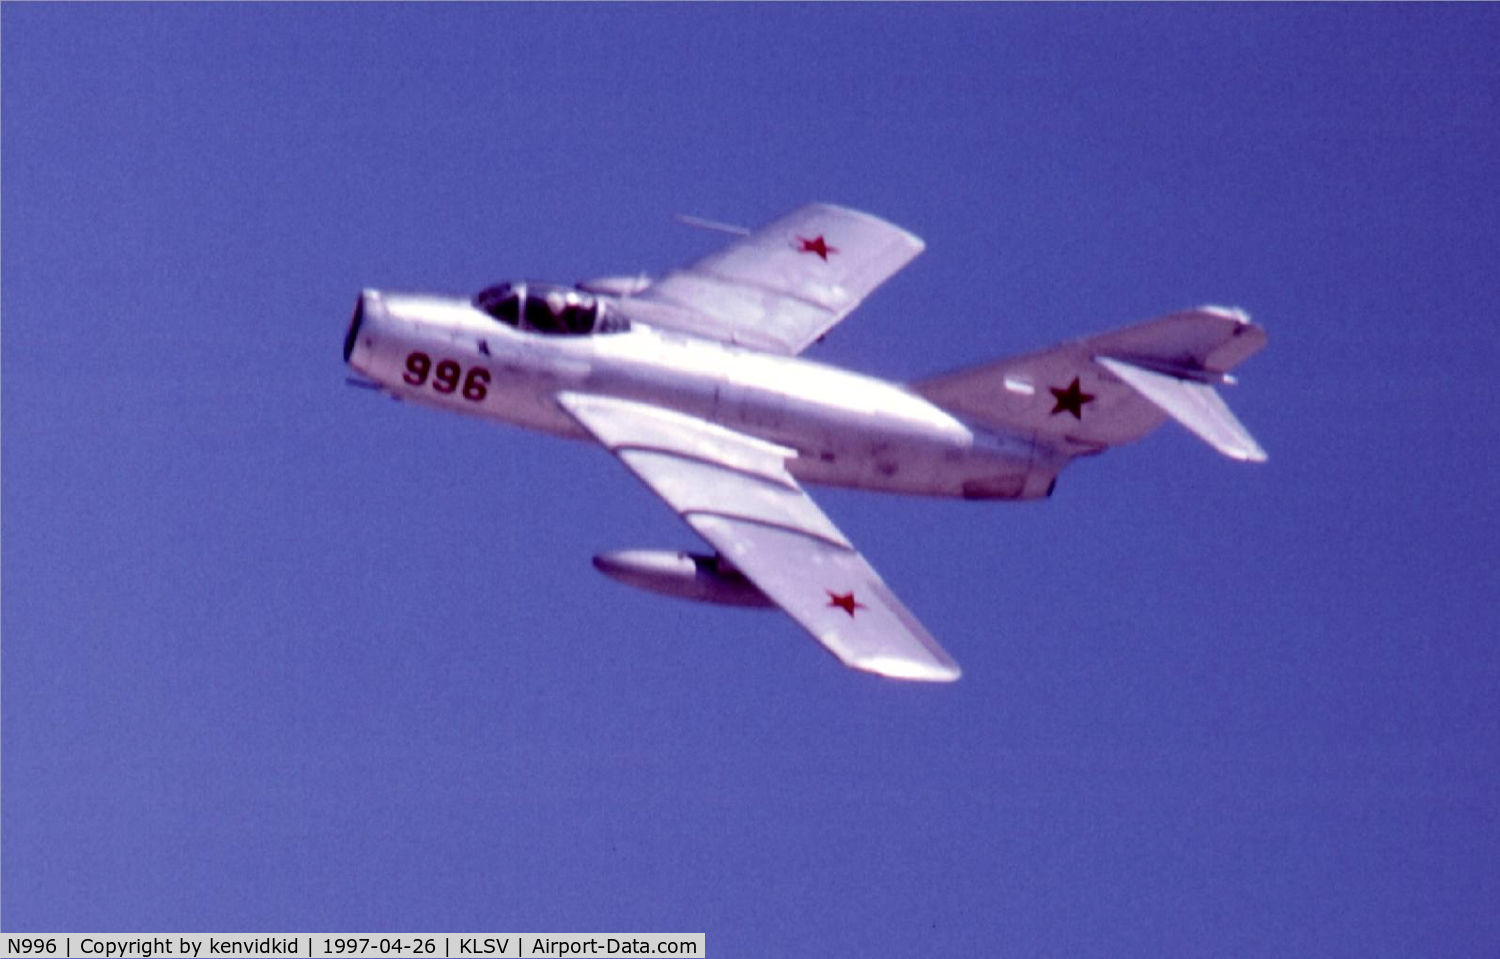 N996, 1950 Mikoyan-Gurevich MiG-15 C/N 122071, At the 1997 50th Anniversary of the USAF air display, Nellis AFB.